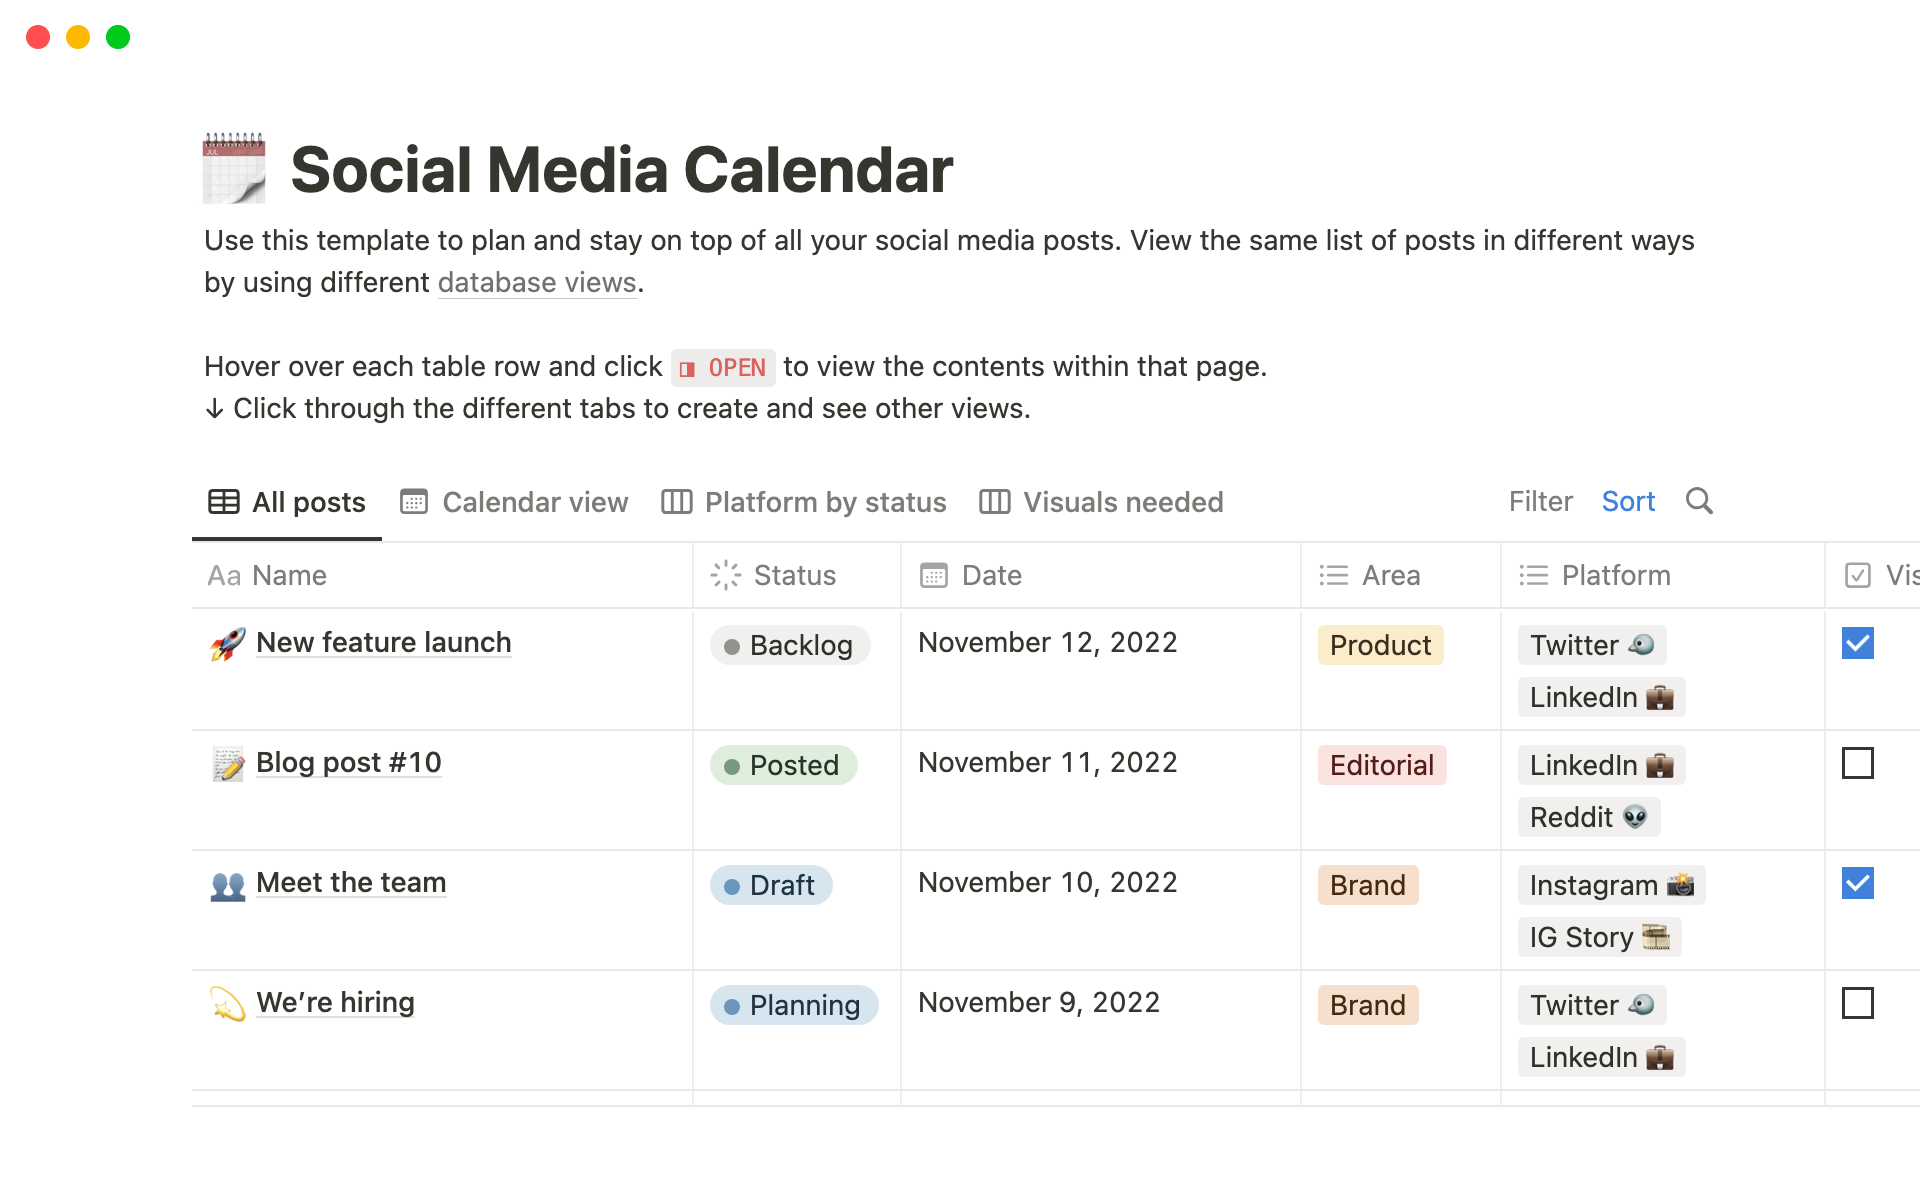 Use this template to draft, plan, and write all of your social posts in one simple database. You can view your own posts in a calendar to get an idea of timelines, or switch to a board view to see platform usage.